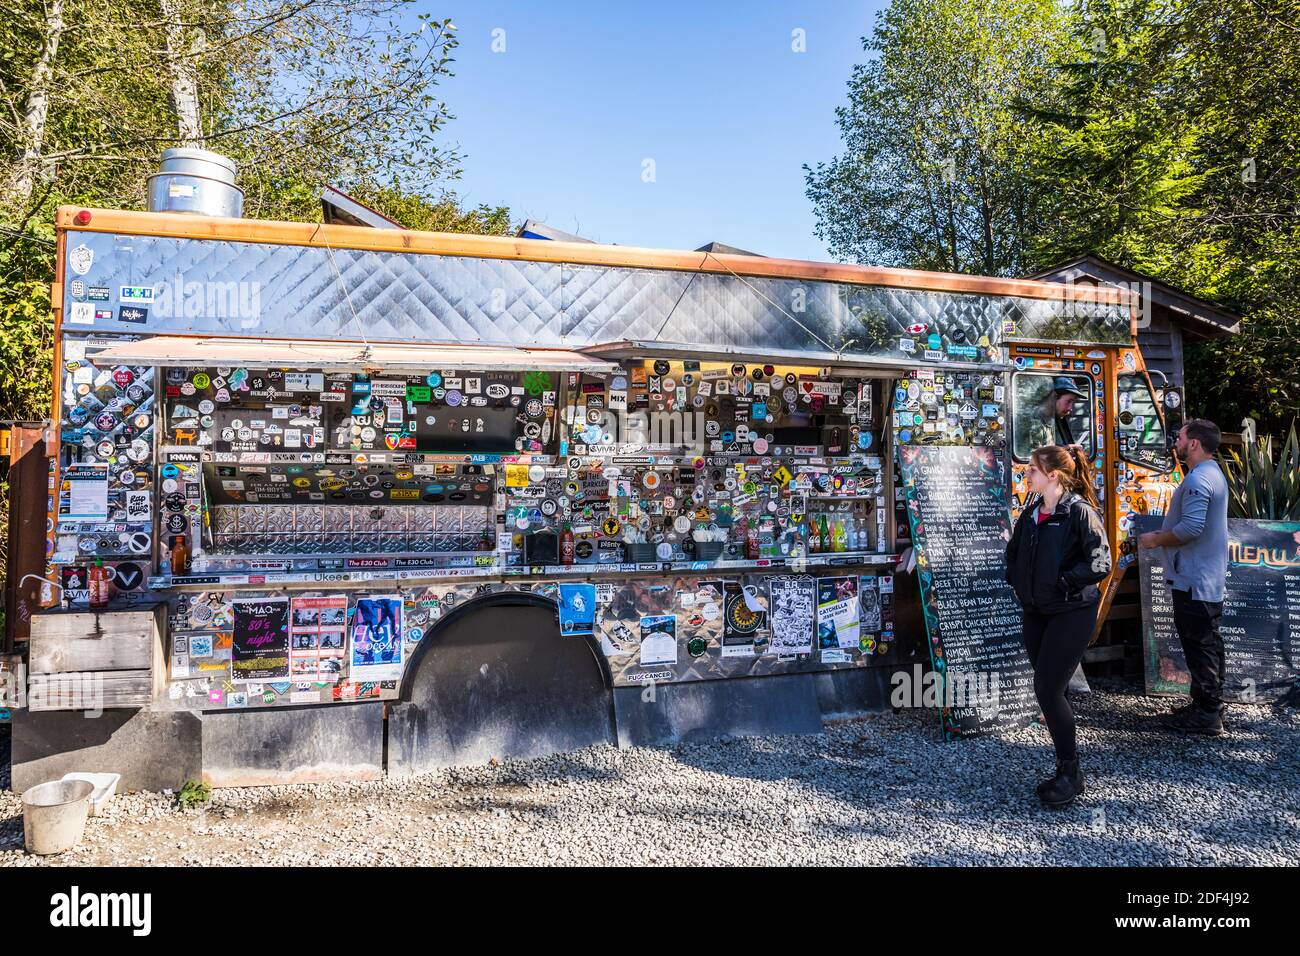 People placing orders at the famous taco truck, Tacofino in Tofino, BC, Canada. Stock Photo